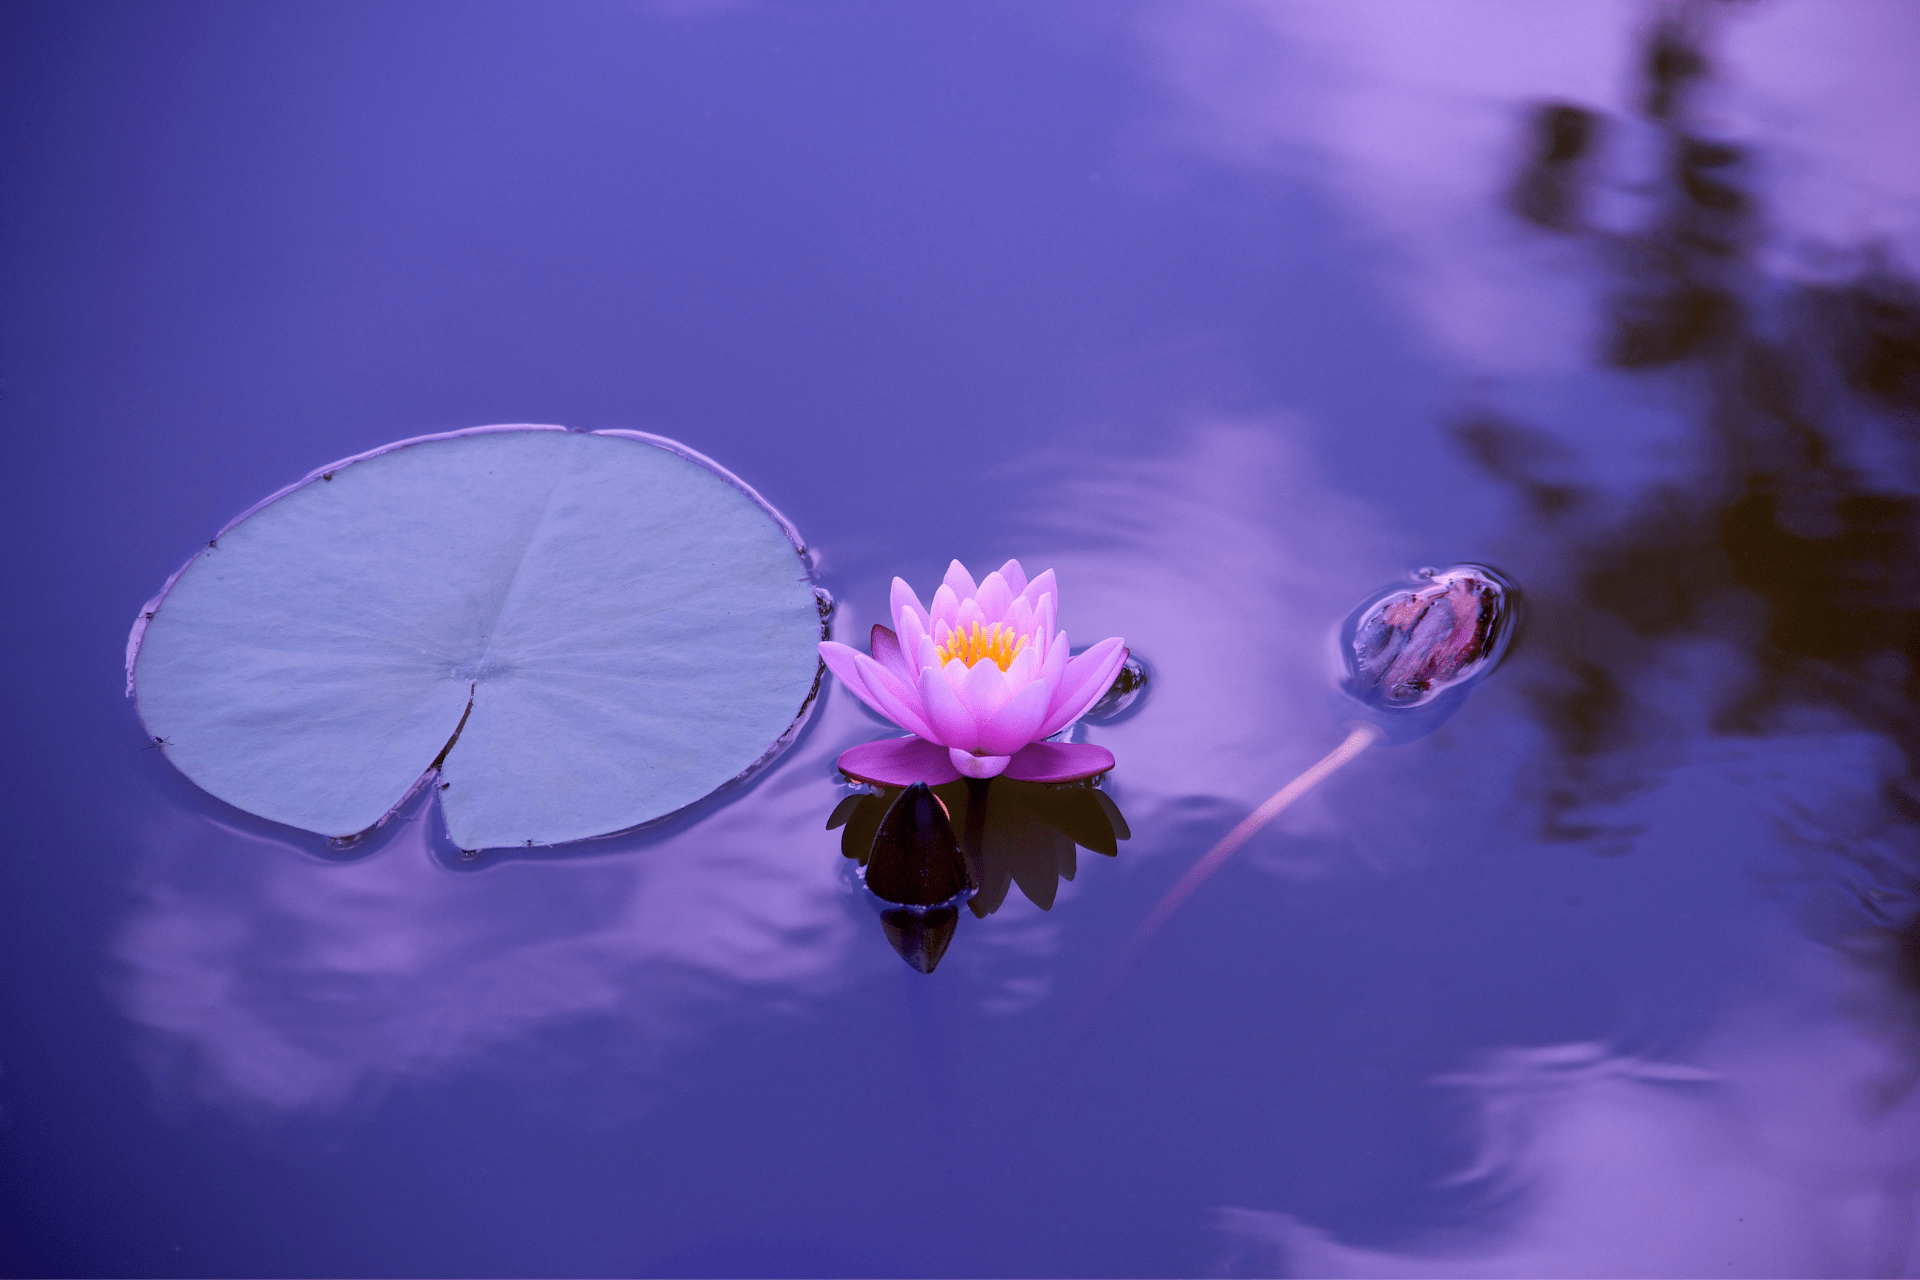 lotus flower and lily pad on pond at dusk